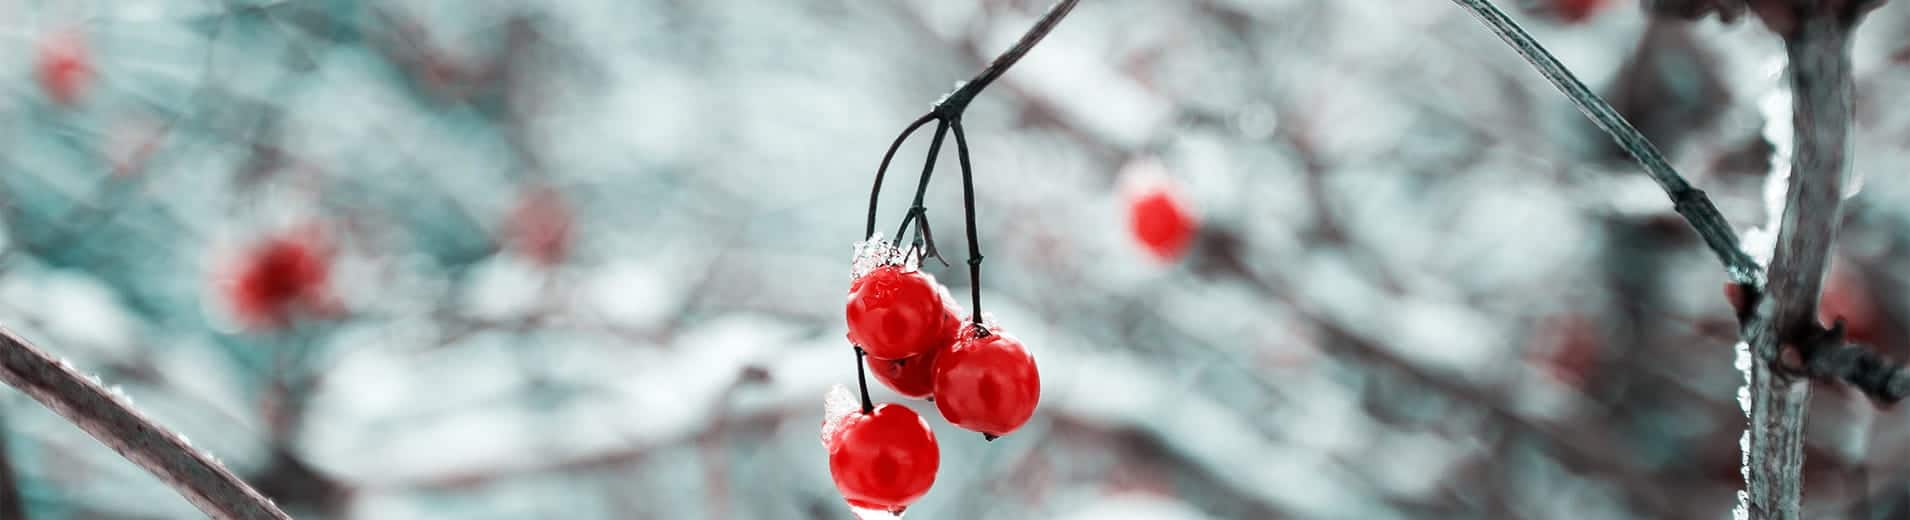 Red_berries_E_0856